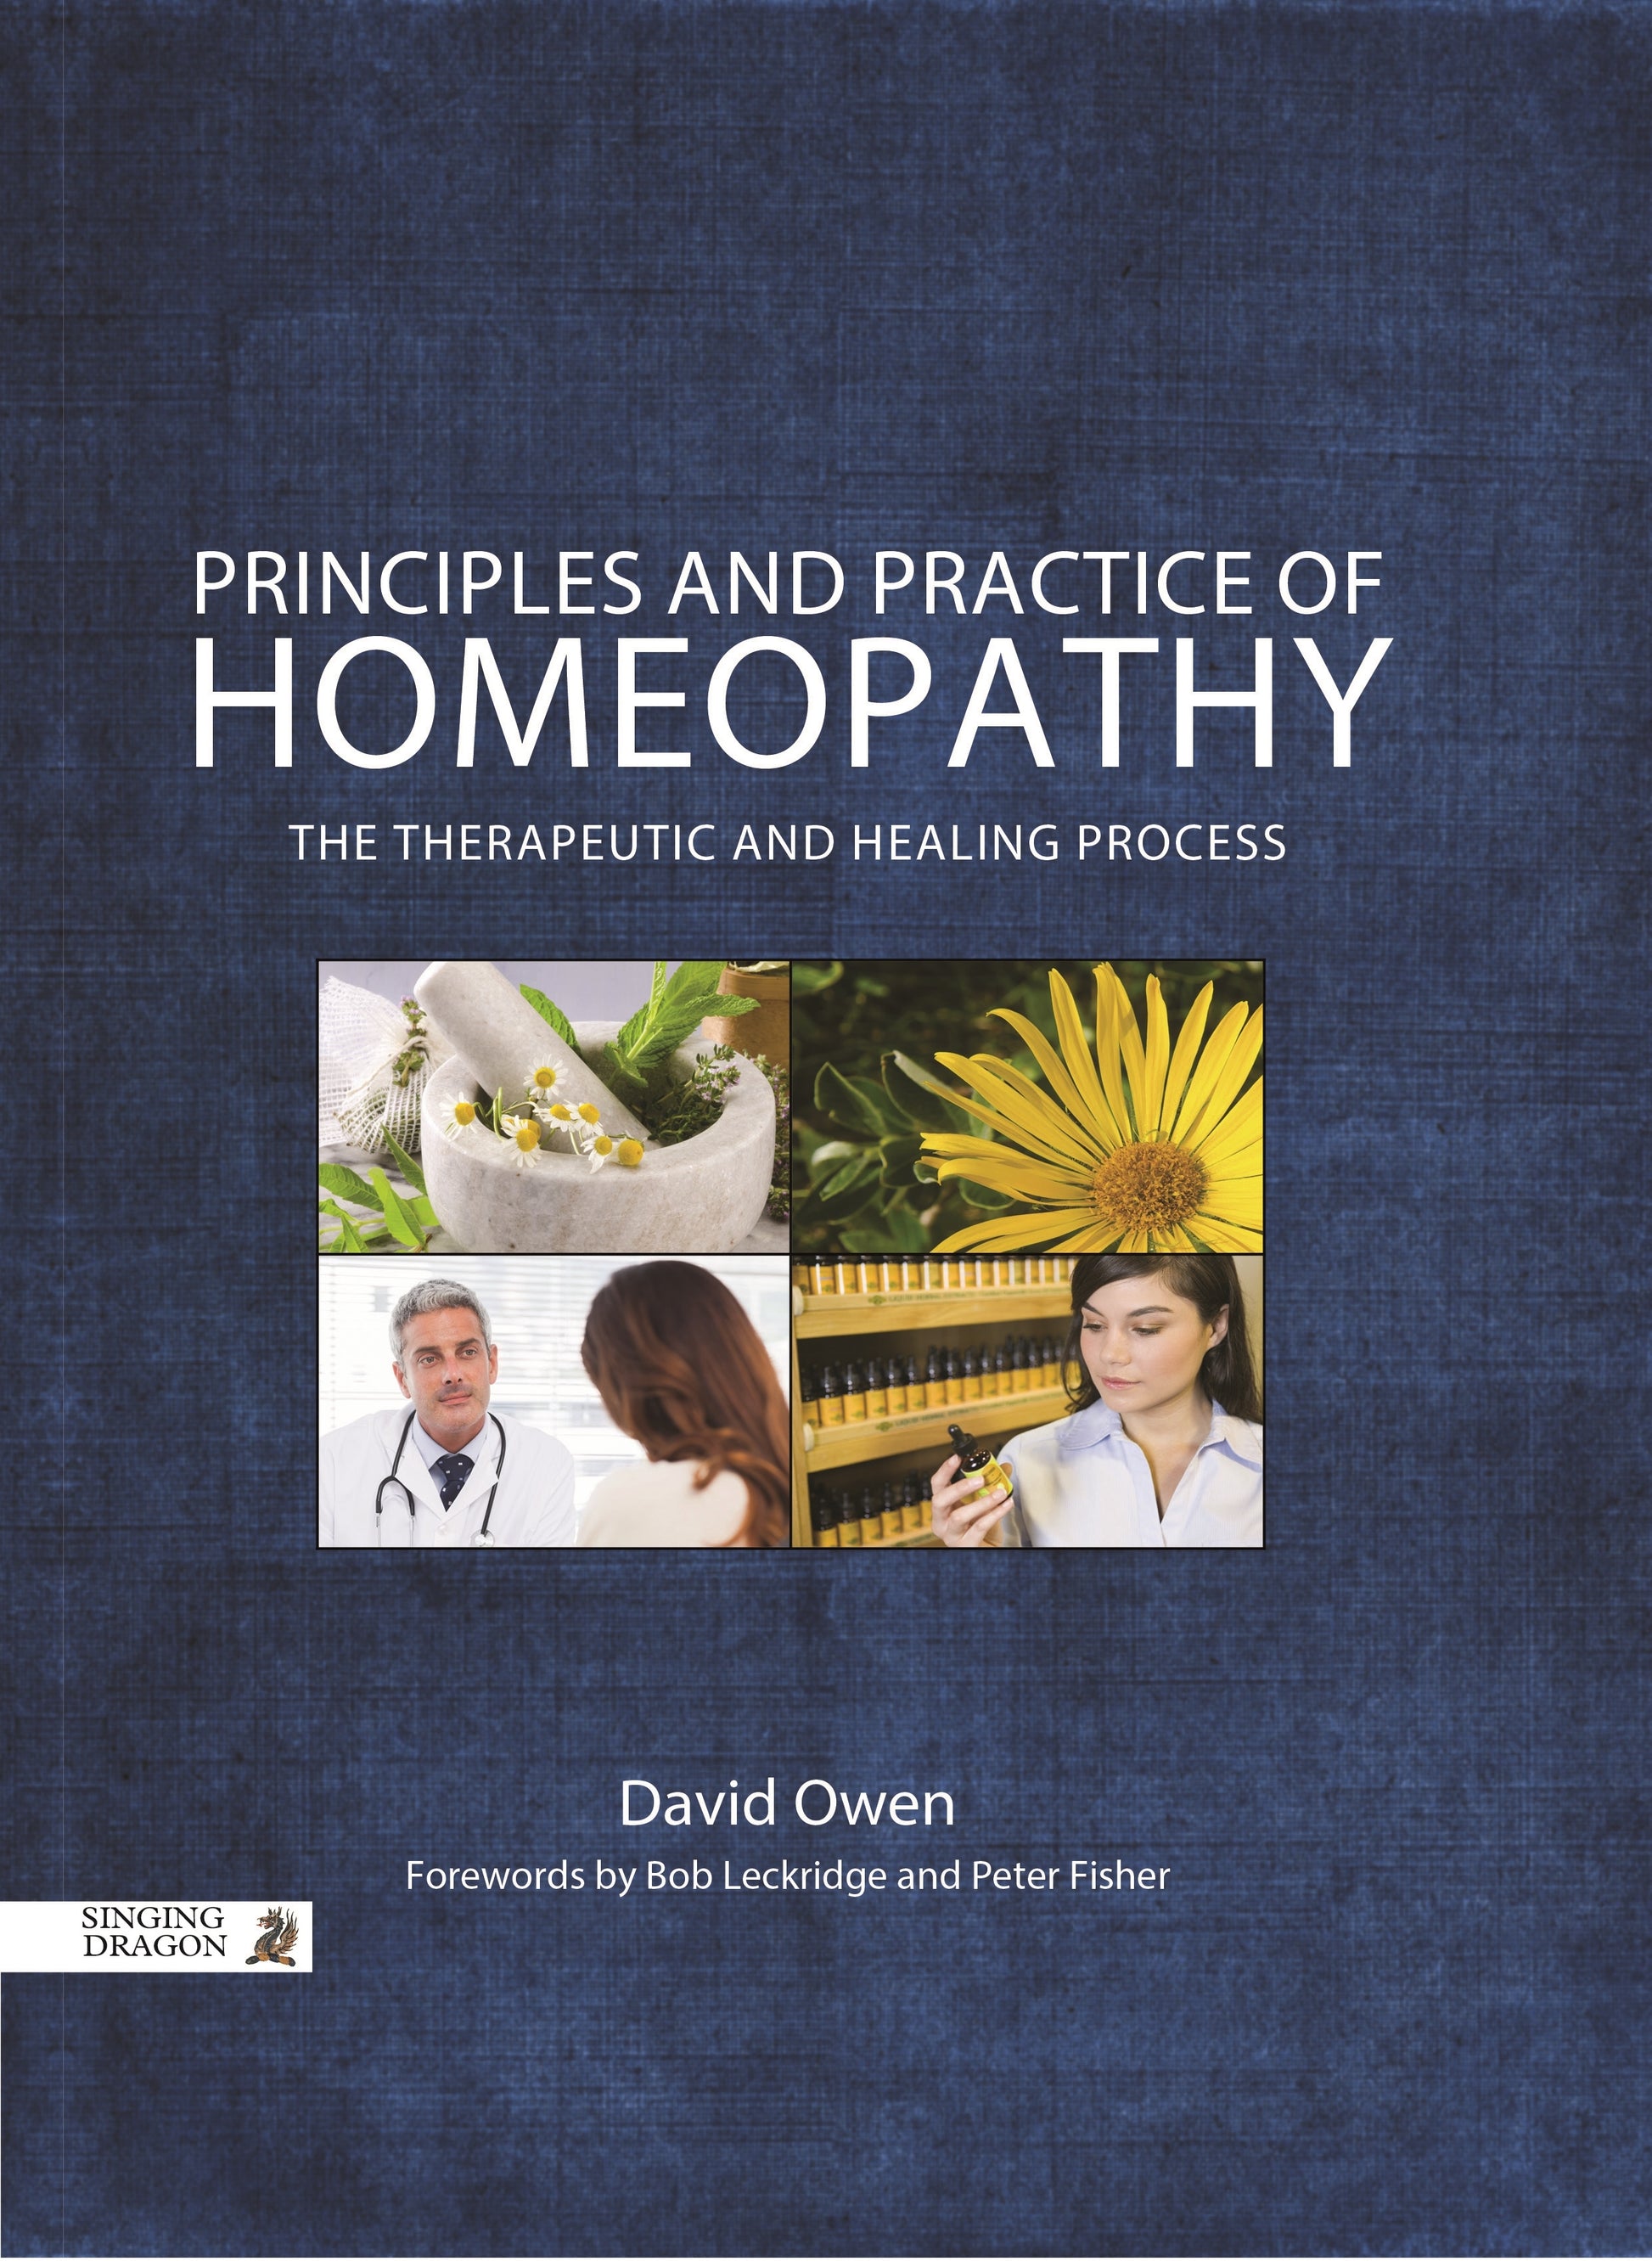 Principles and Practice of Homeopathy by David Owen, Bob Leckridge, Peter Fisher